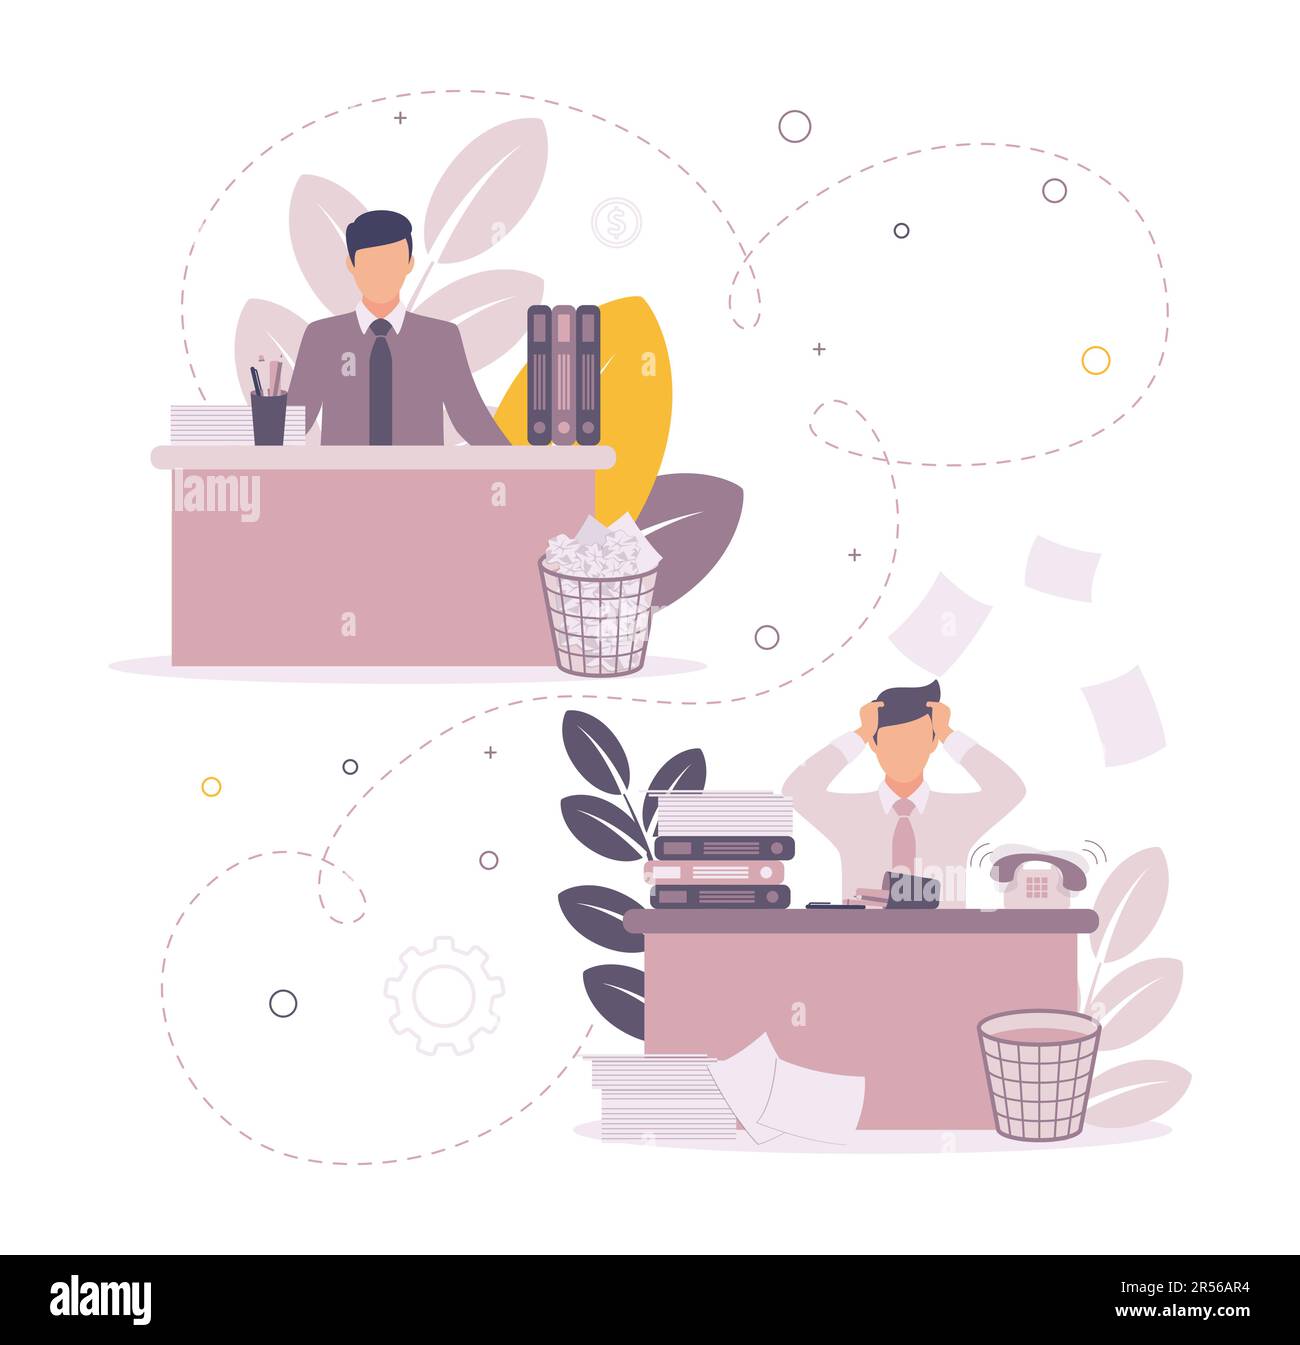 Time management illustration. Illustration of a man sitting at a table on which papers and folders, a checkmark above them on a task, against a Stock Vector